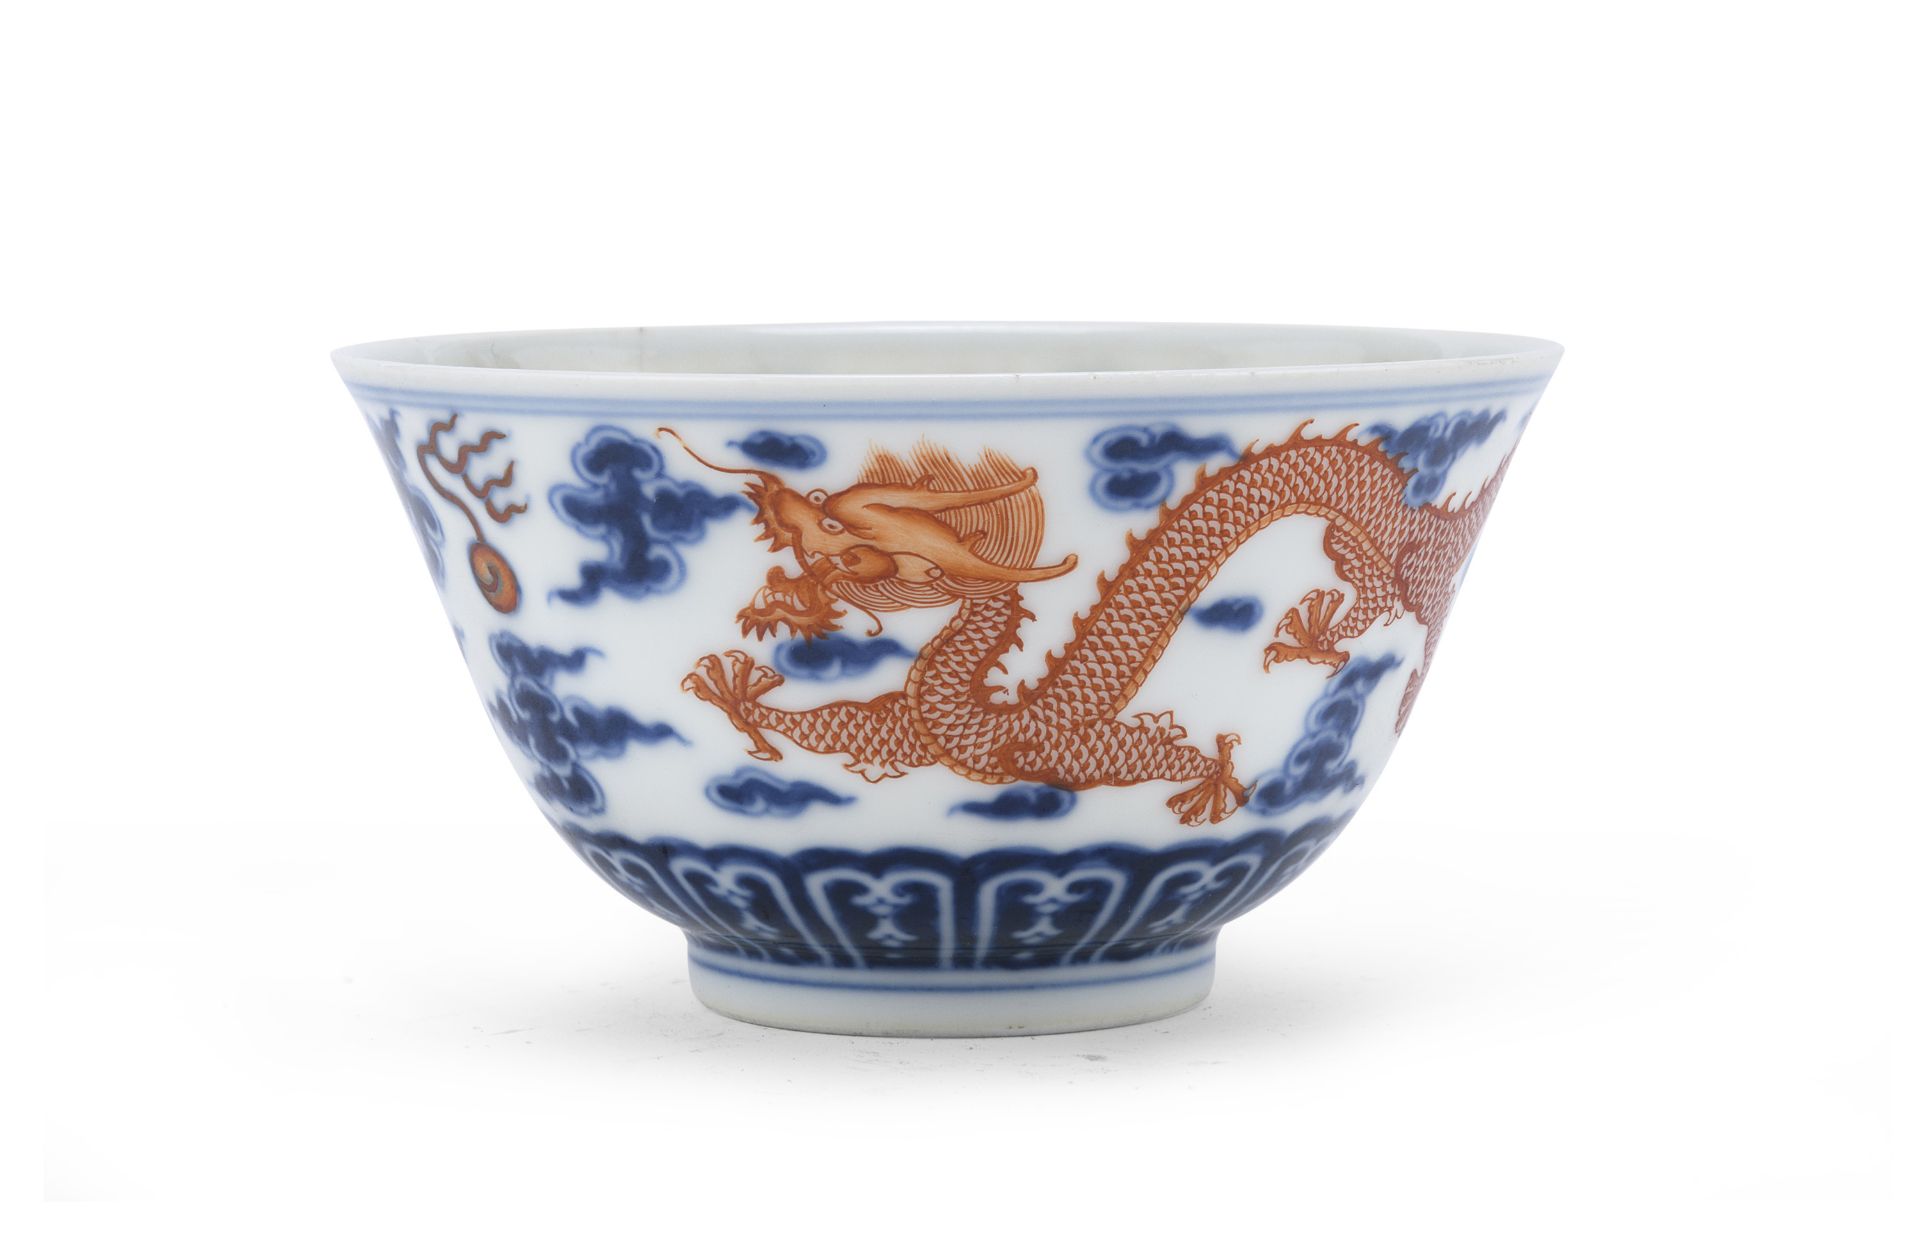 A CHINESE POLYCHROME ENAMELED PORCELAIN BOWL FIRST HALF 20TH CENTURY.